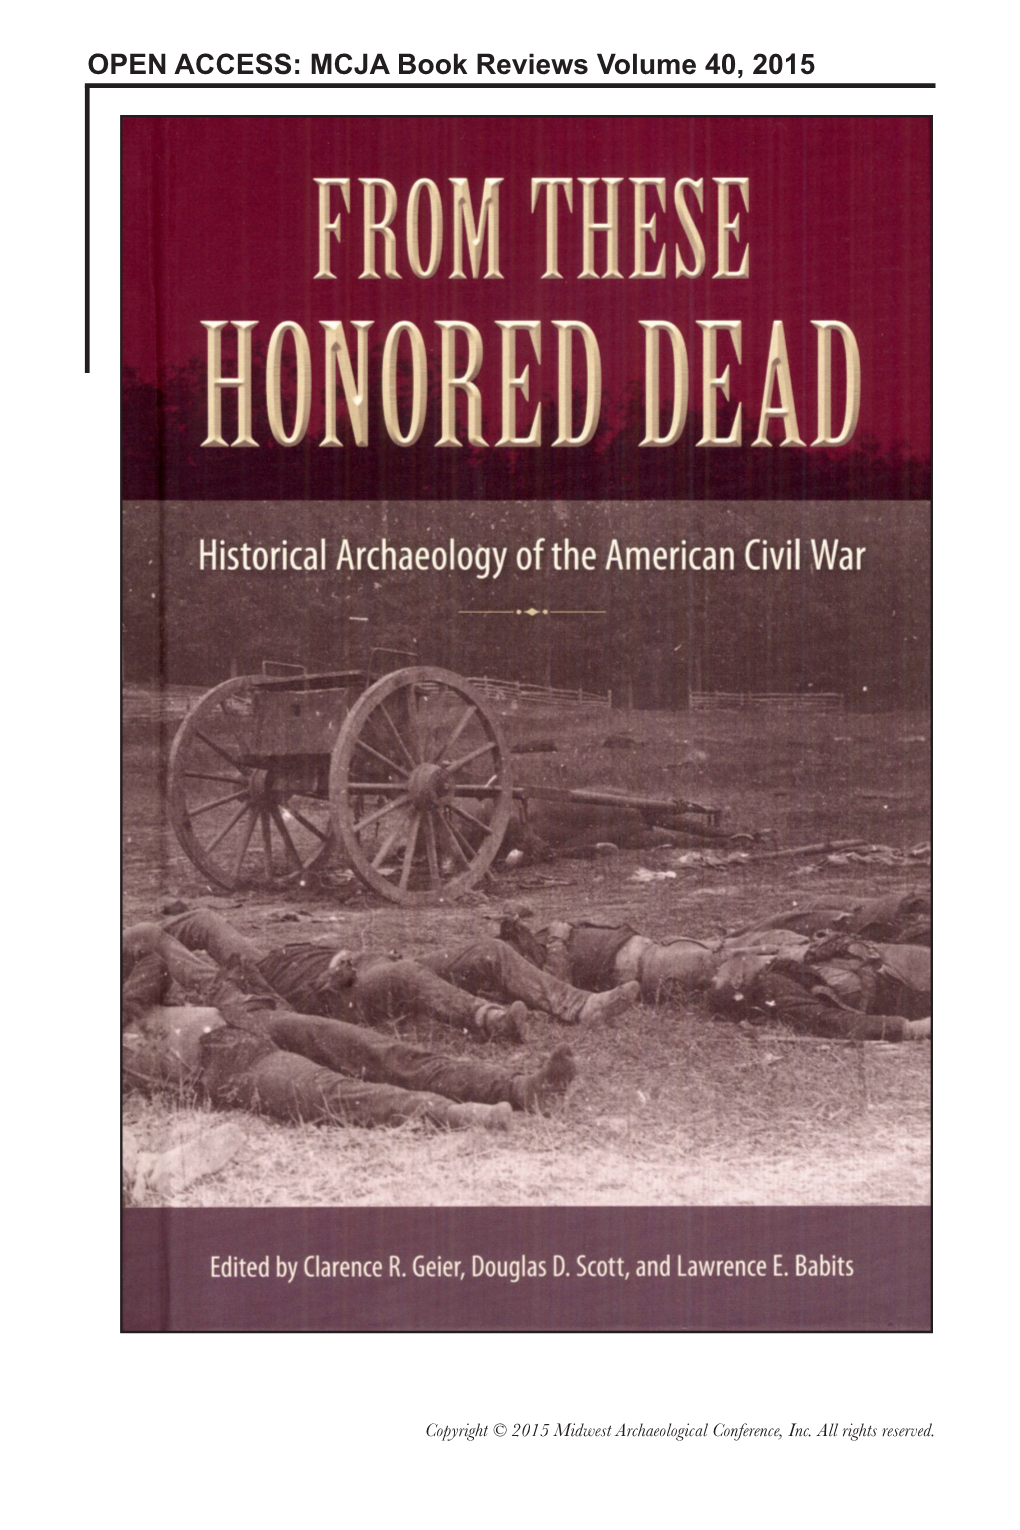 Historical Archaeology of the American Civil War